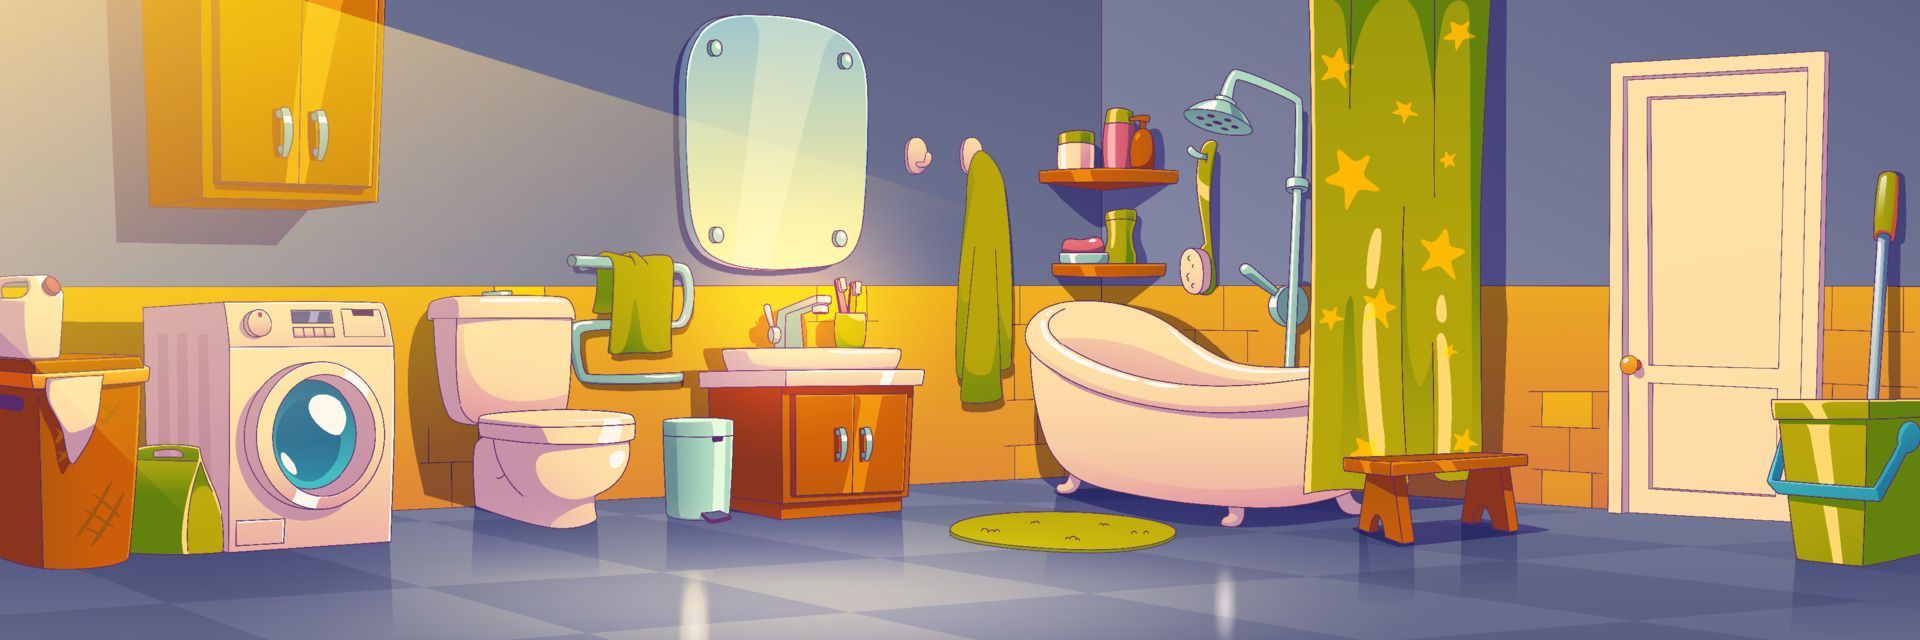 cartoon of a bathroom with many water fixtures